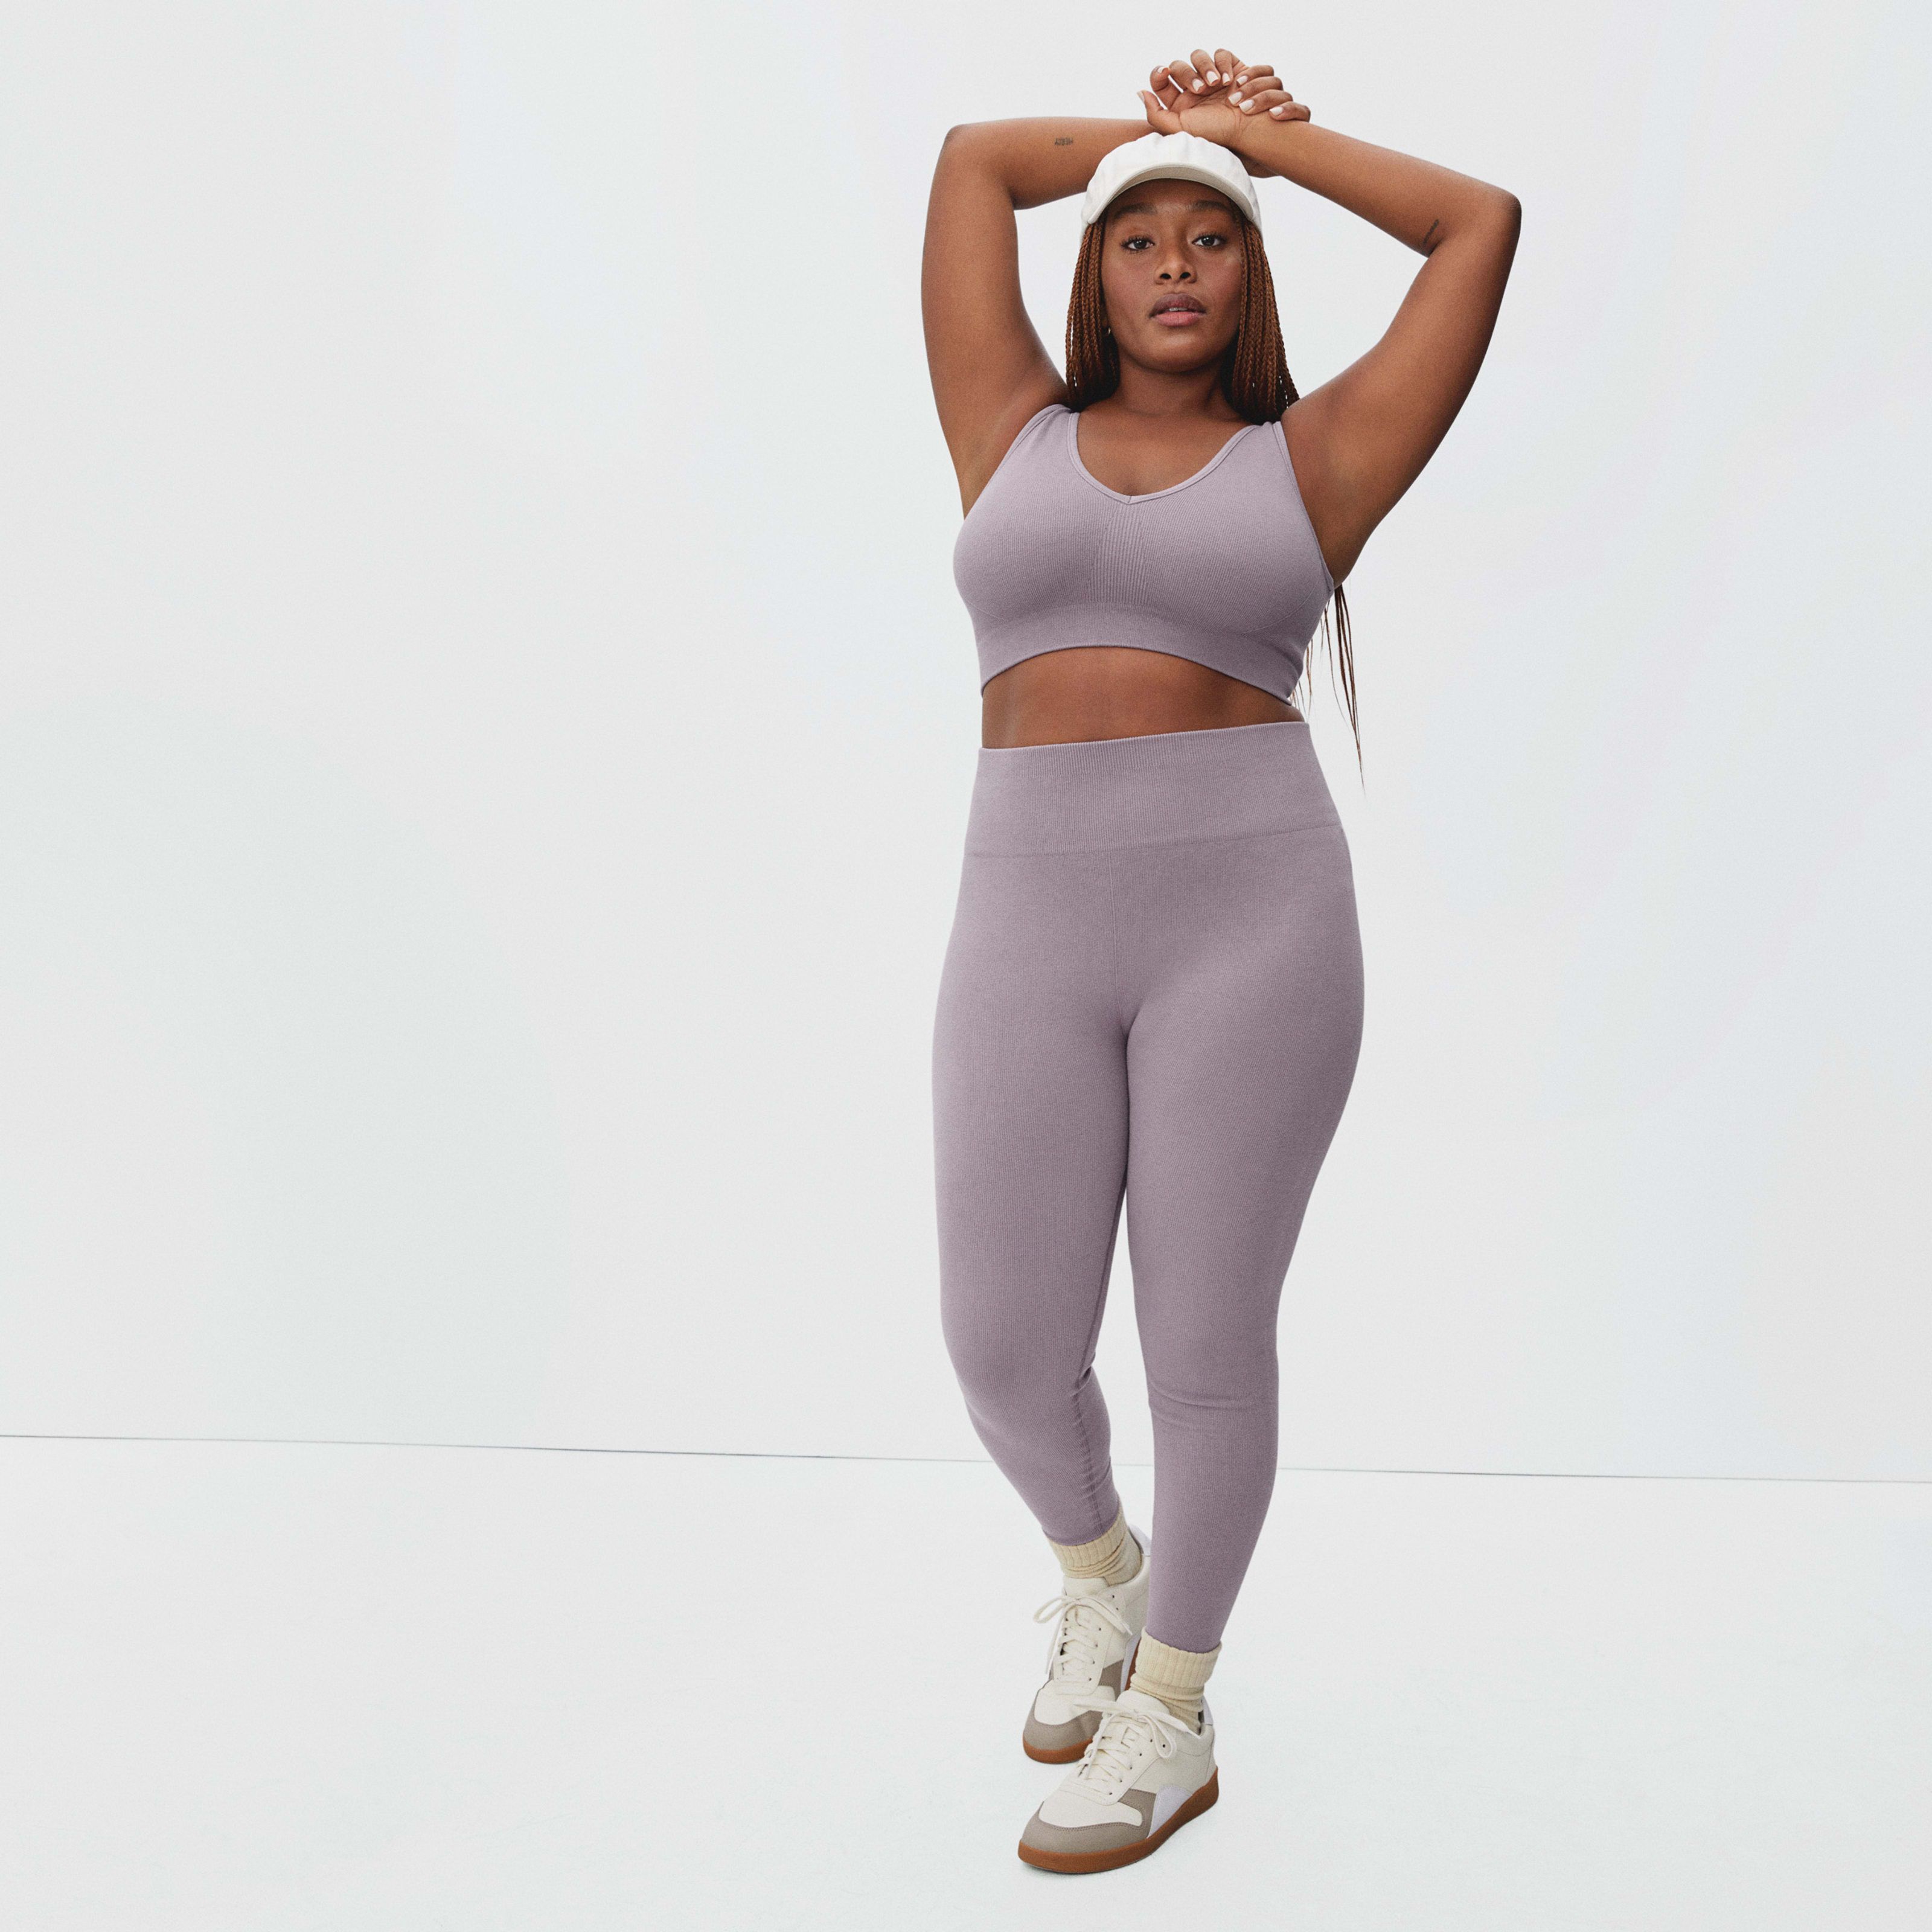 Seamless Legging by Everlane in Dusty Lavender, Size M/L | Everlane